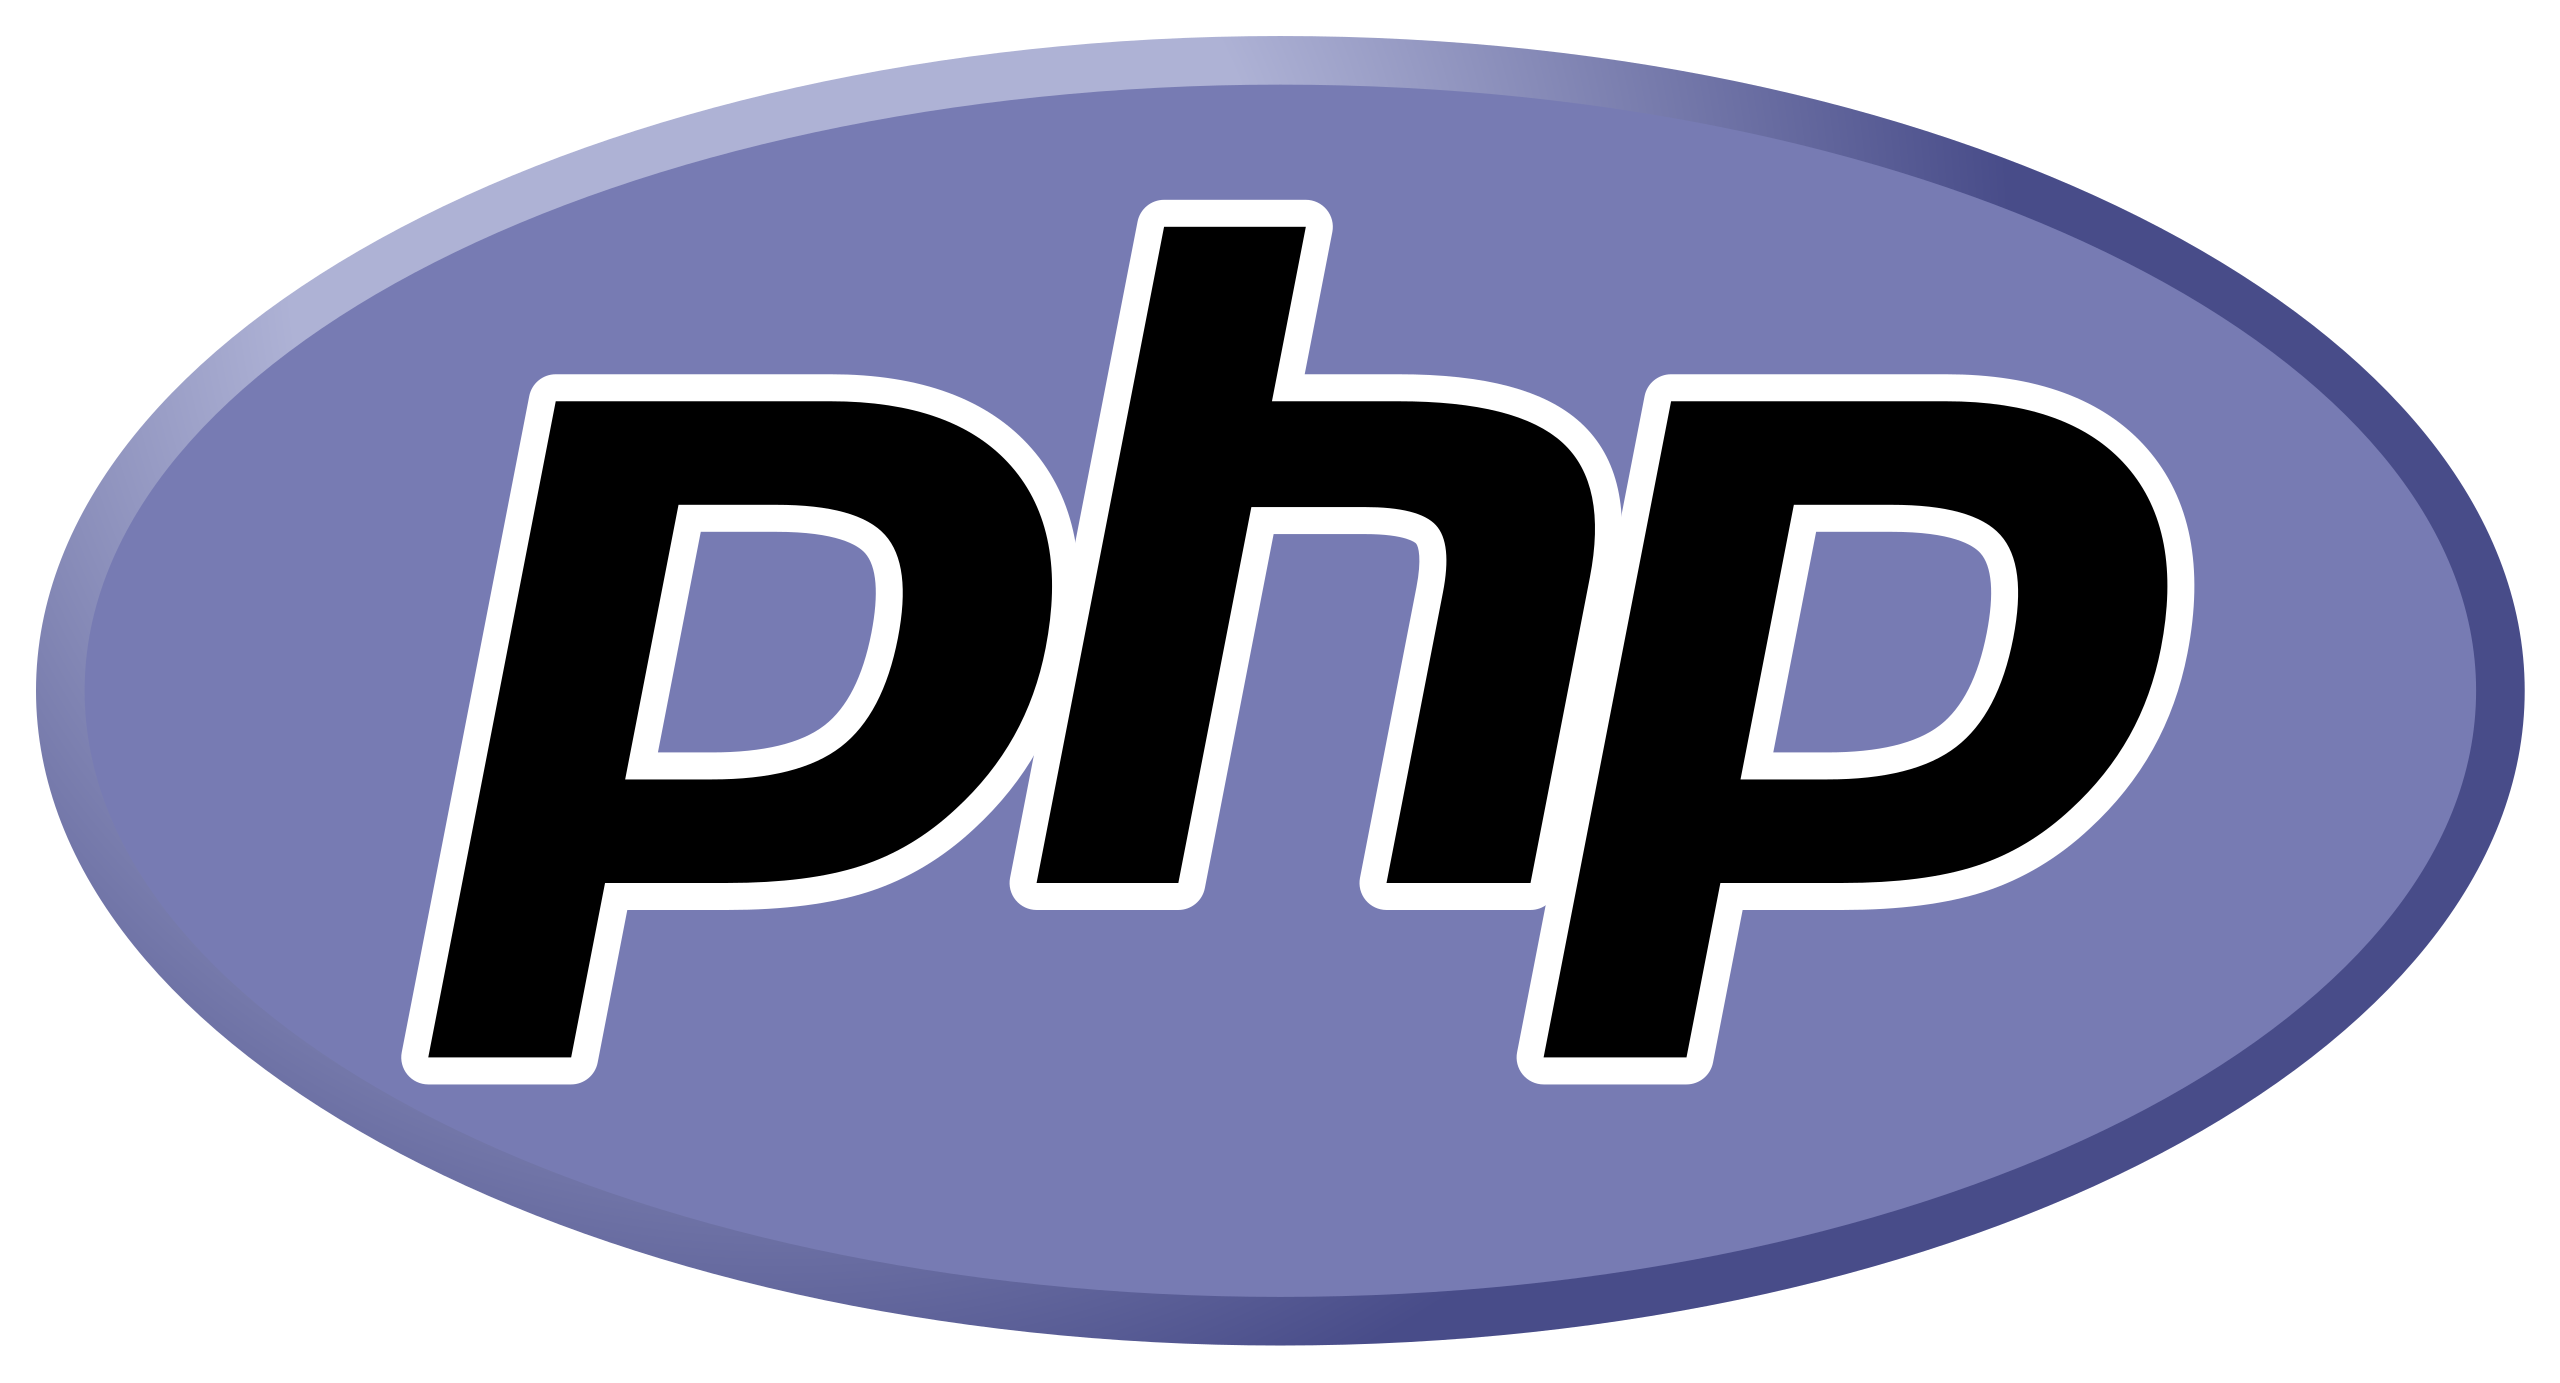 How to Make Money With PHP?